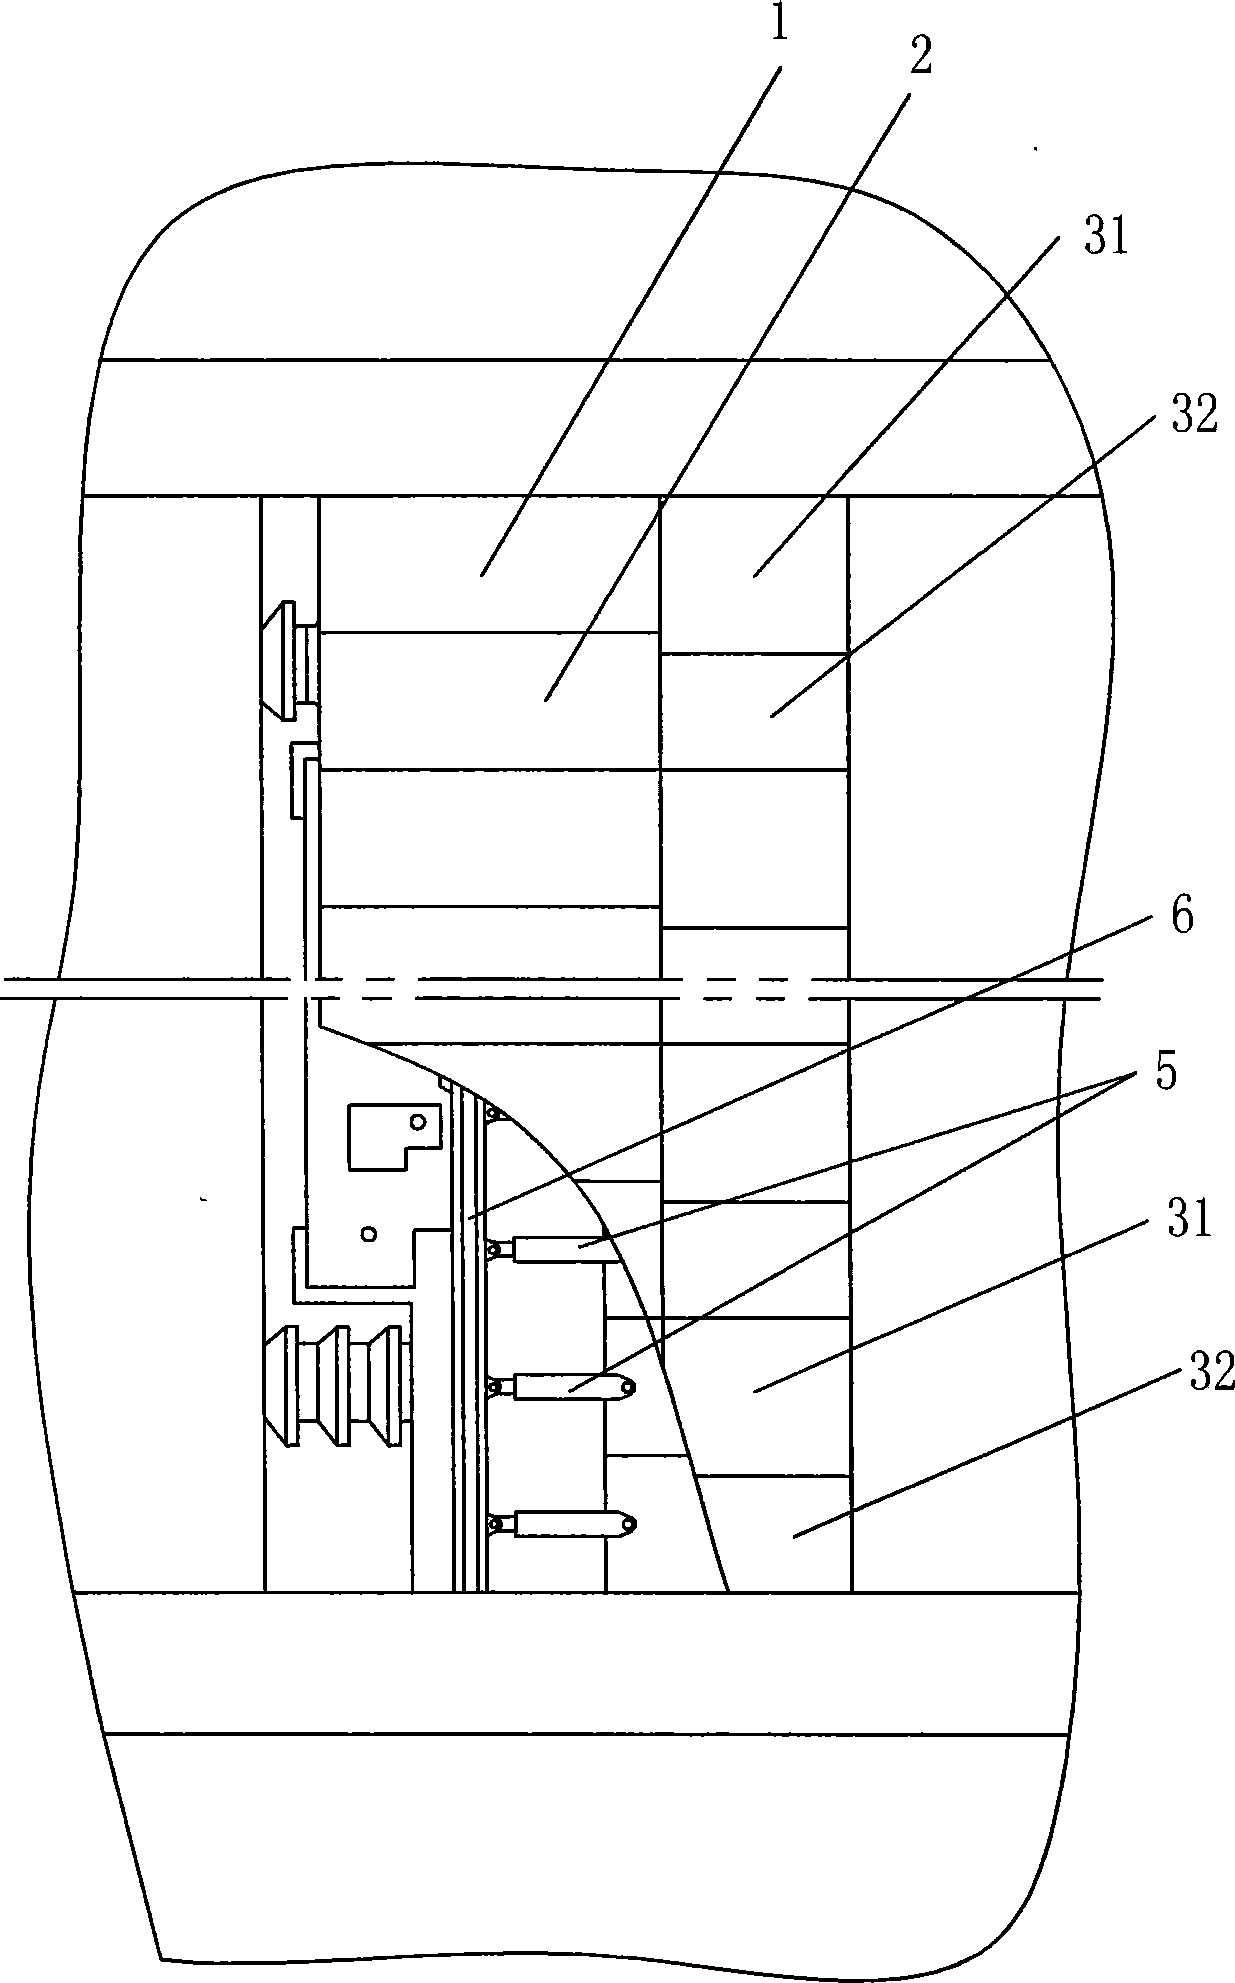 Large-inclination-angle coal bed fully-mechanized mining bracket and support method